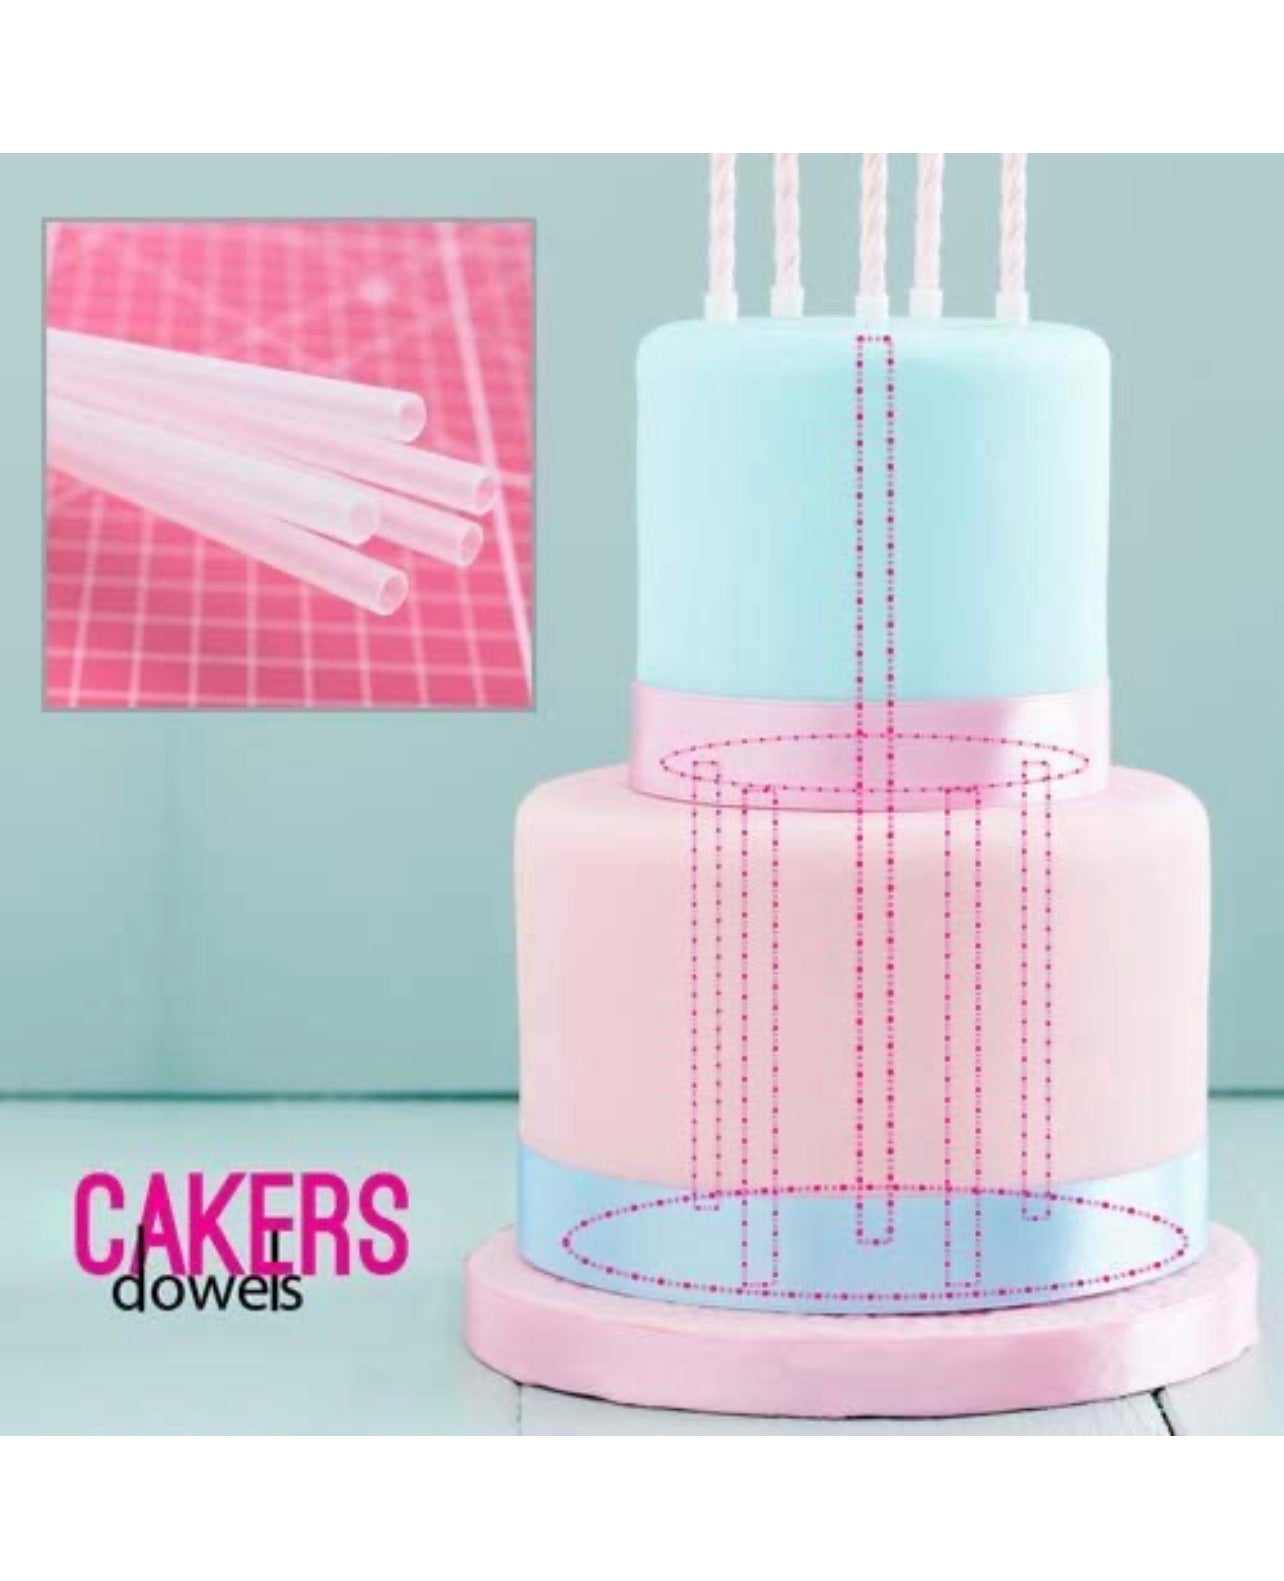 40Pcs Cake Dowel Rods Set, Cake Sticks Support Rods for Tiered Cakes  Including 5 Cake Separator Plates for 4, 6, 8, 10,12 Inch Cakes and 20  White Cake Sticks Support Rods,15 Clear Cake Stacking Dowels - Walmart.com